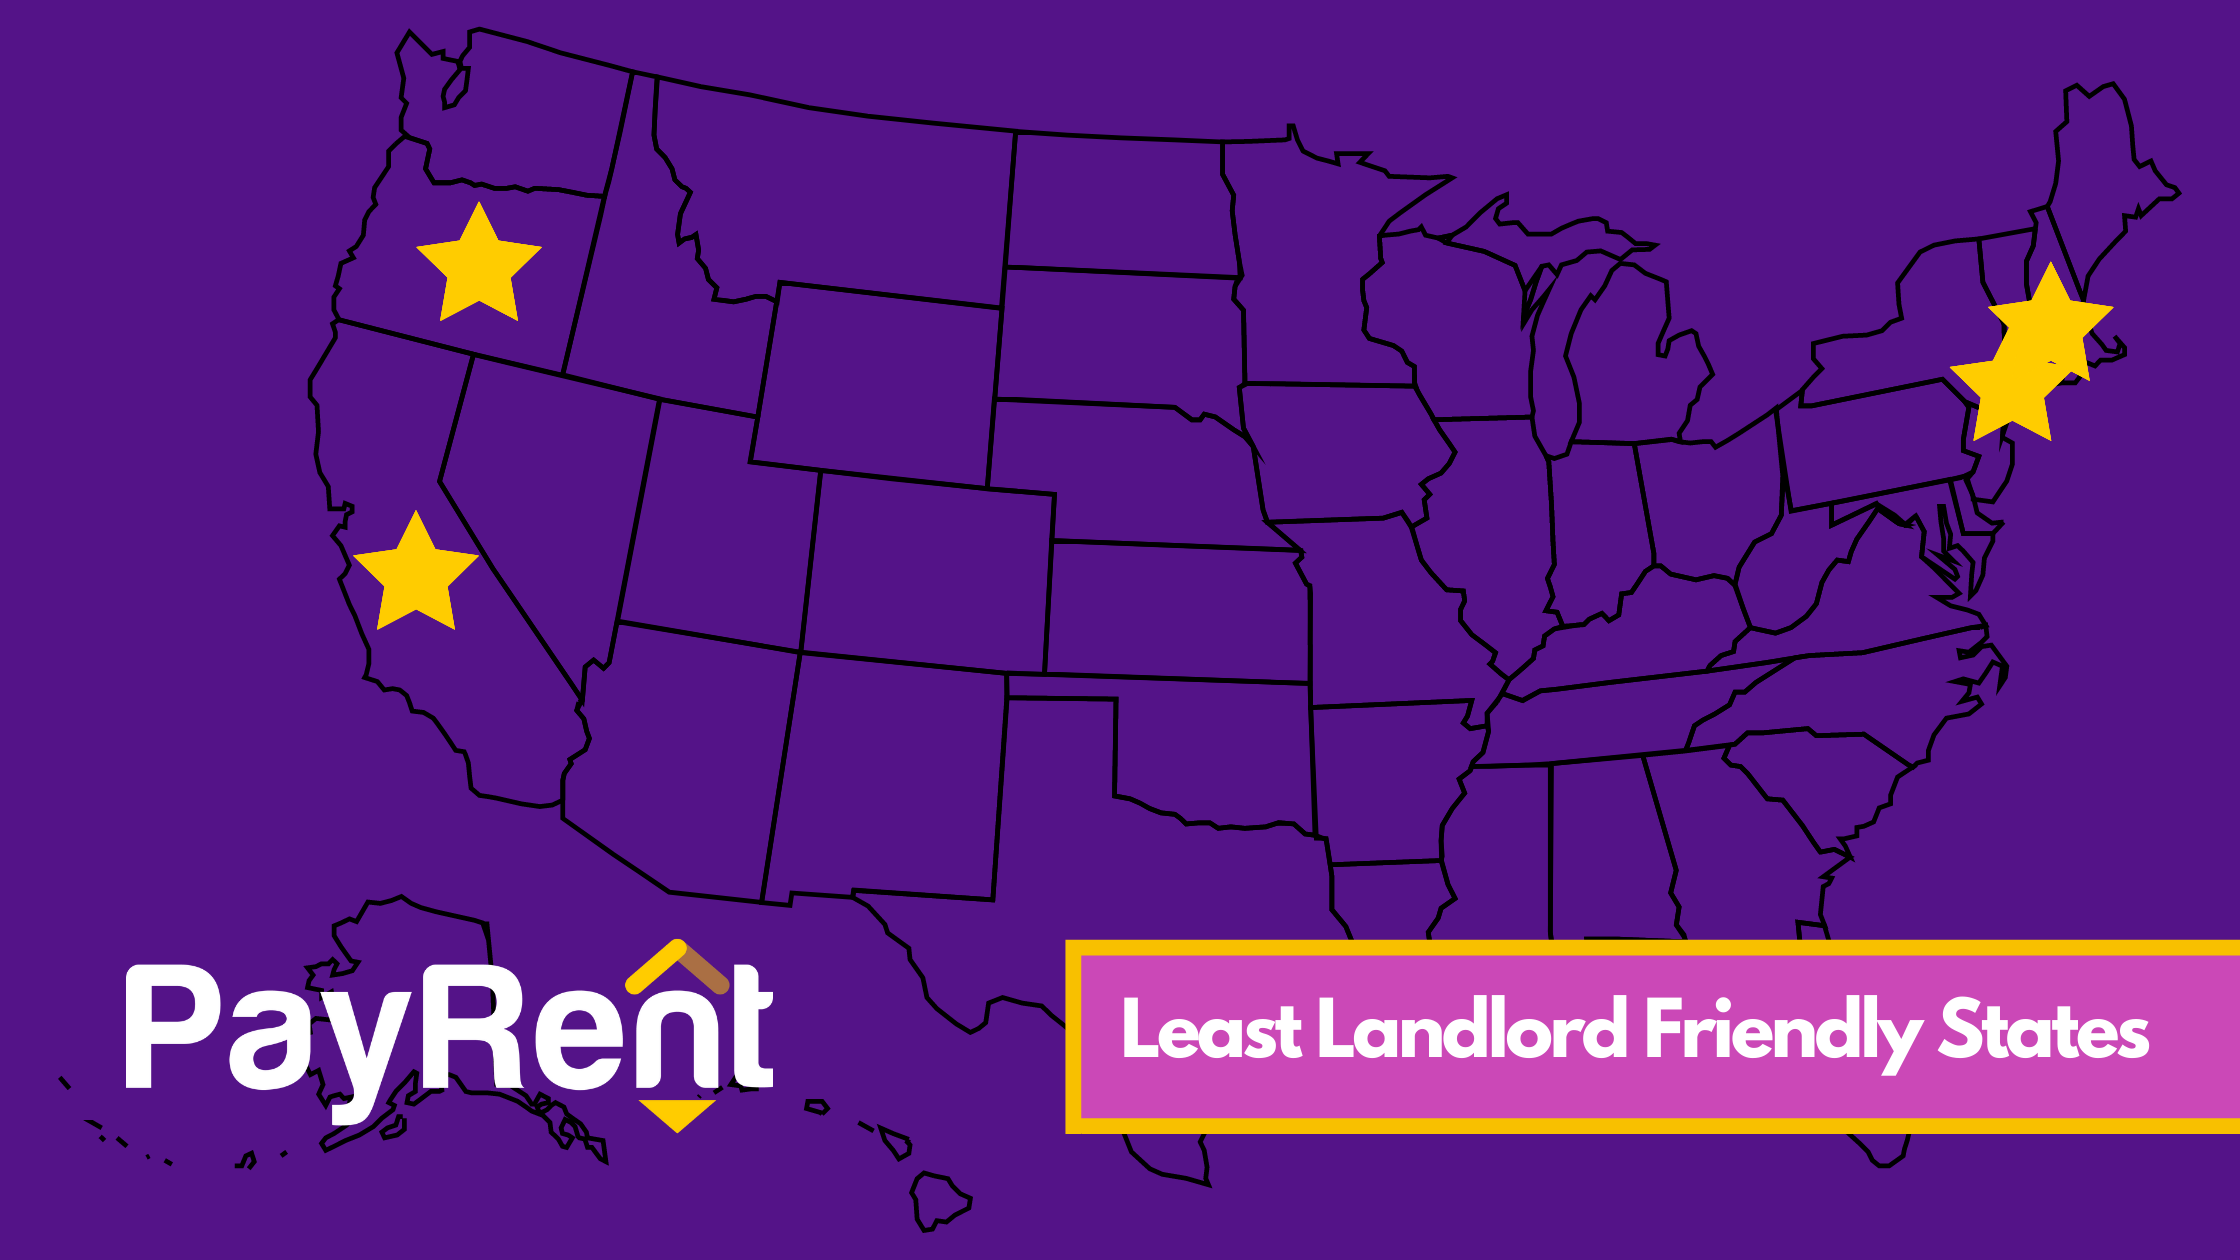 Least Landlord Friendly States, which states are not landlord friendly, worst states for landlords